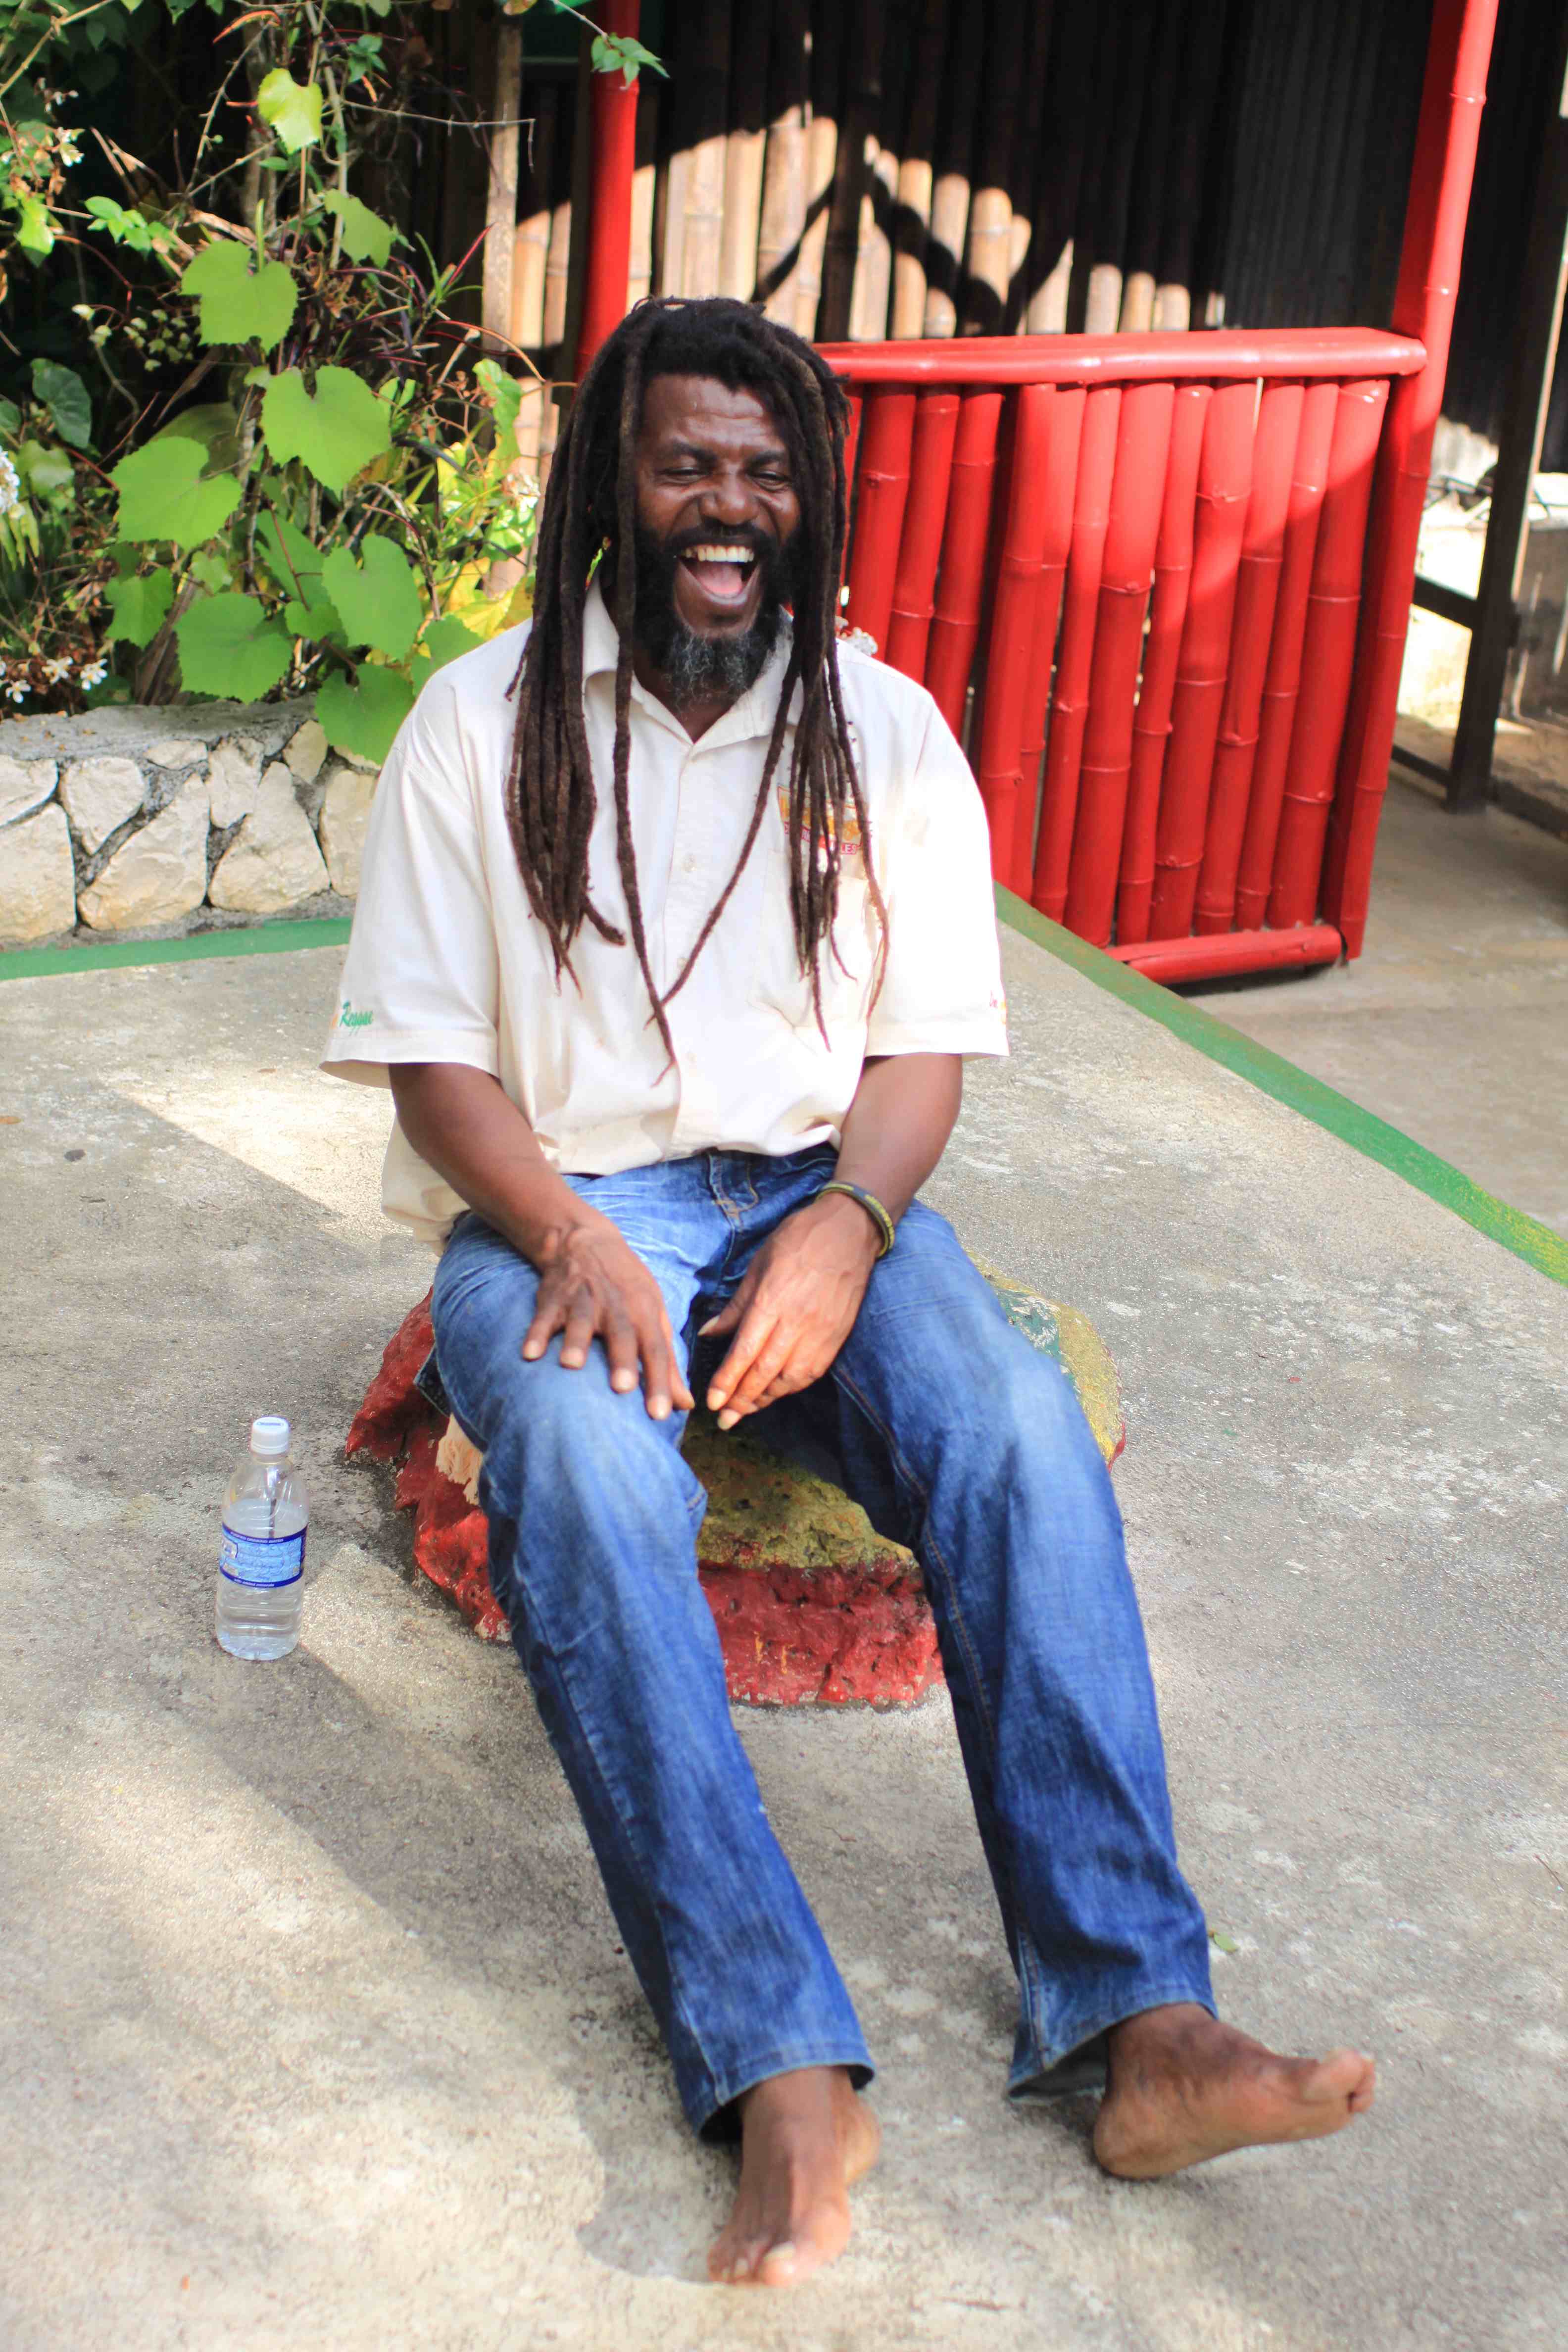 Meeting the YouTube Sensation Captain Crazy at 9 Mile, Jamaica | HuffPost